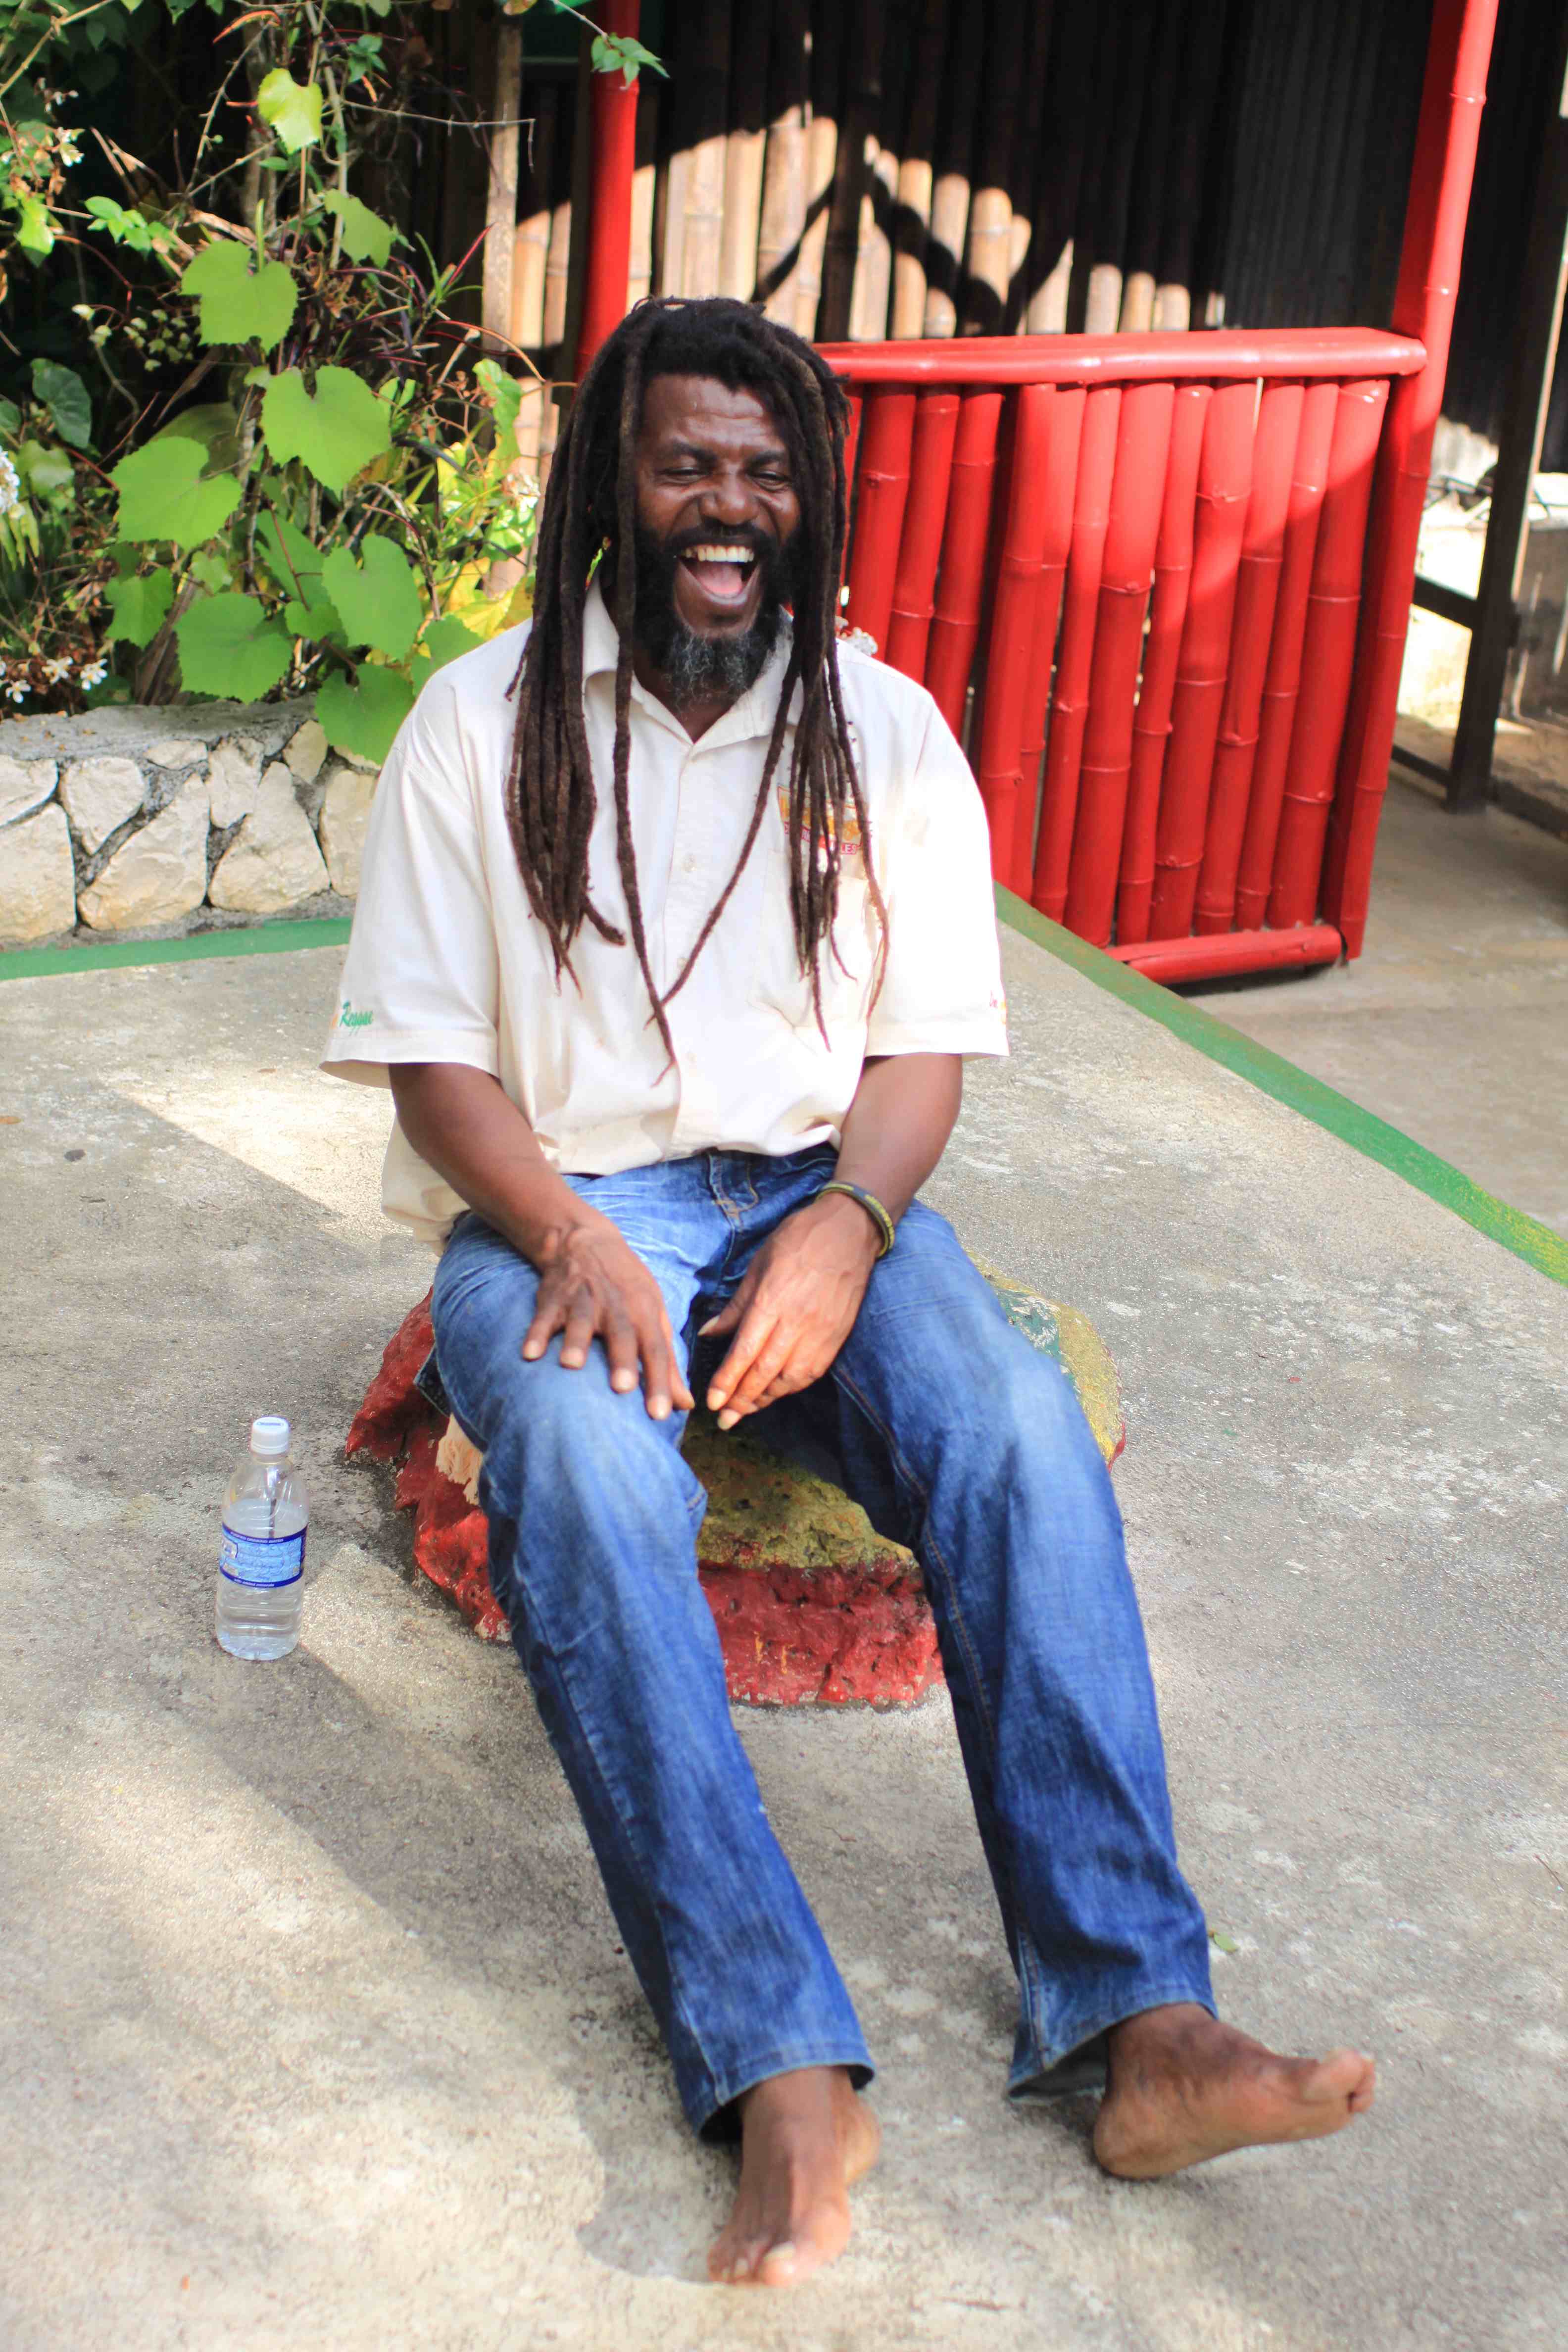 Meeting the YouTube Sensation Captain Crazy at 9 Mile, Jamaica | HuffPost